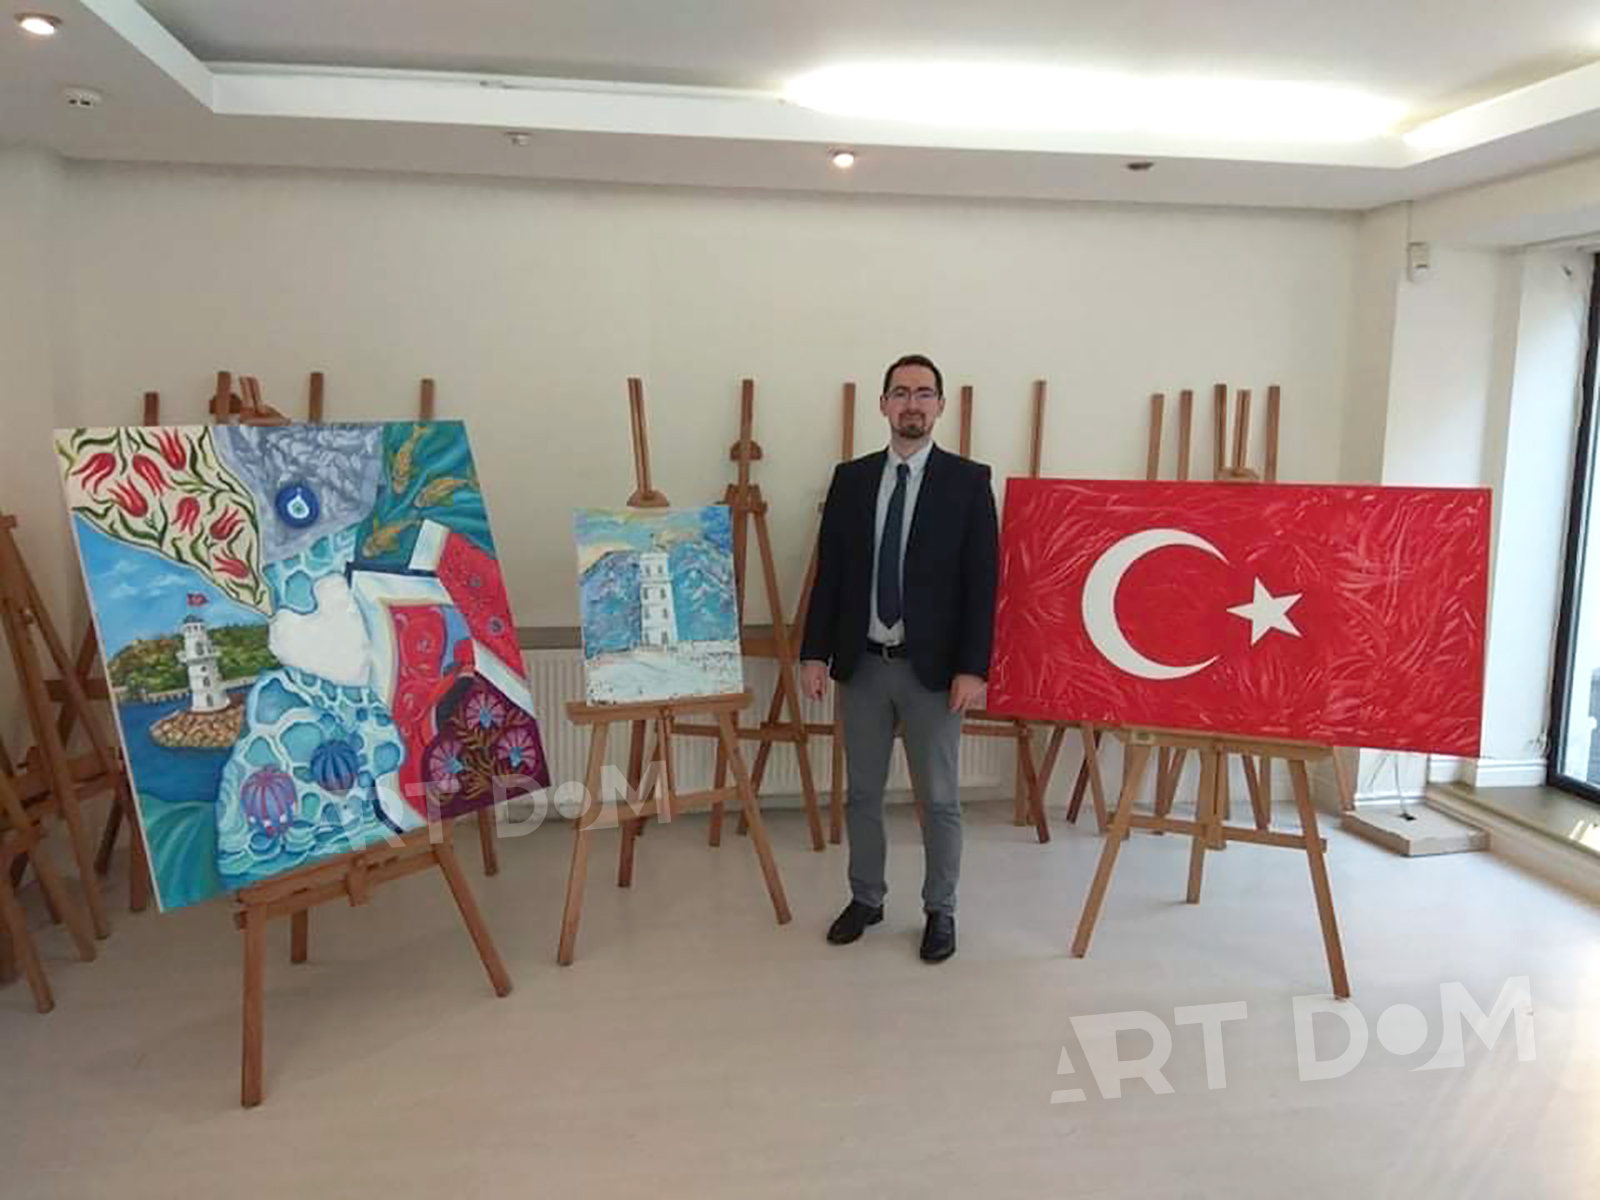 paintings by Anna Medyanik at the Turkish Embassy